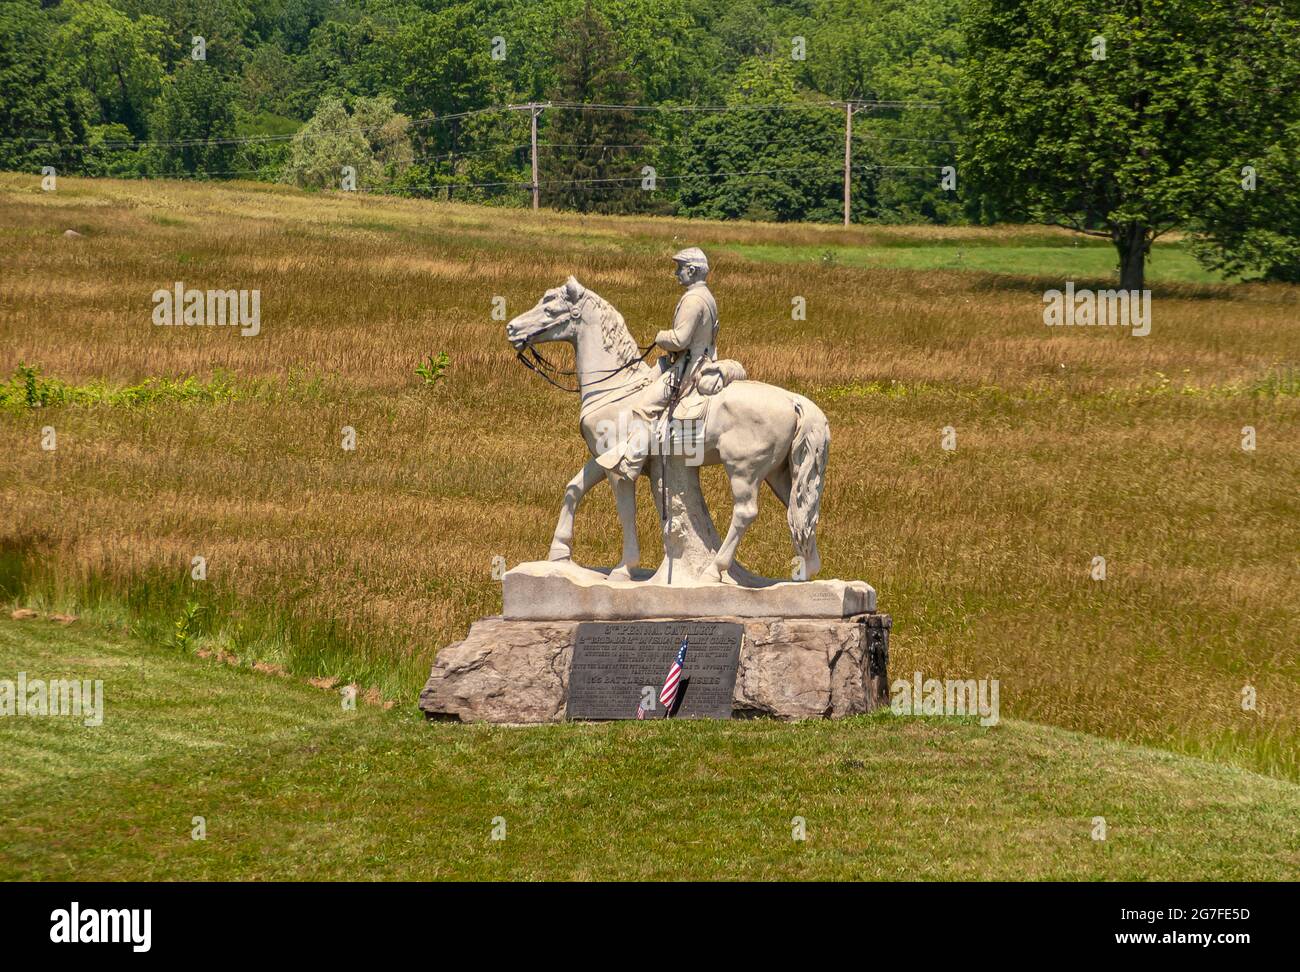 Gettysburg, PA, USA - June 14, 2008: Battlefield monuments.8th Pennsylvania Cavalry white equestrian statue in green-brown weed field with green fores Stock Photo